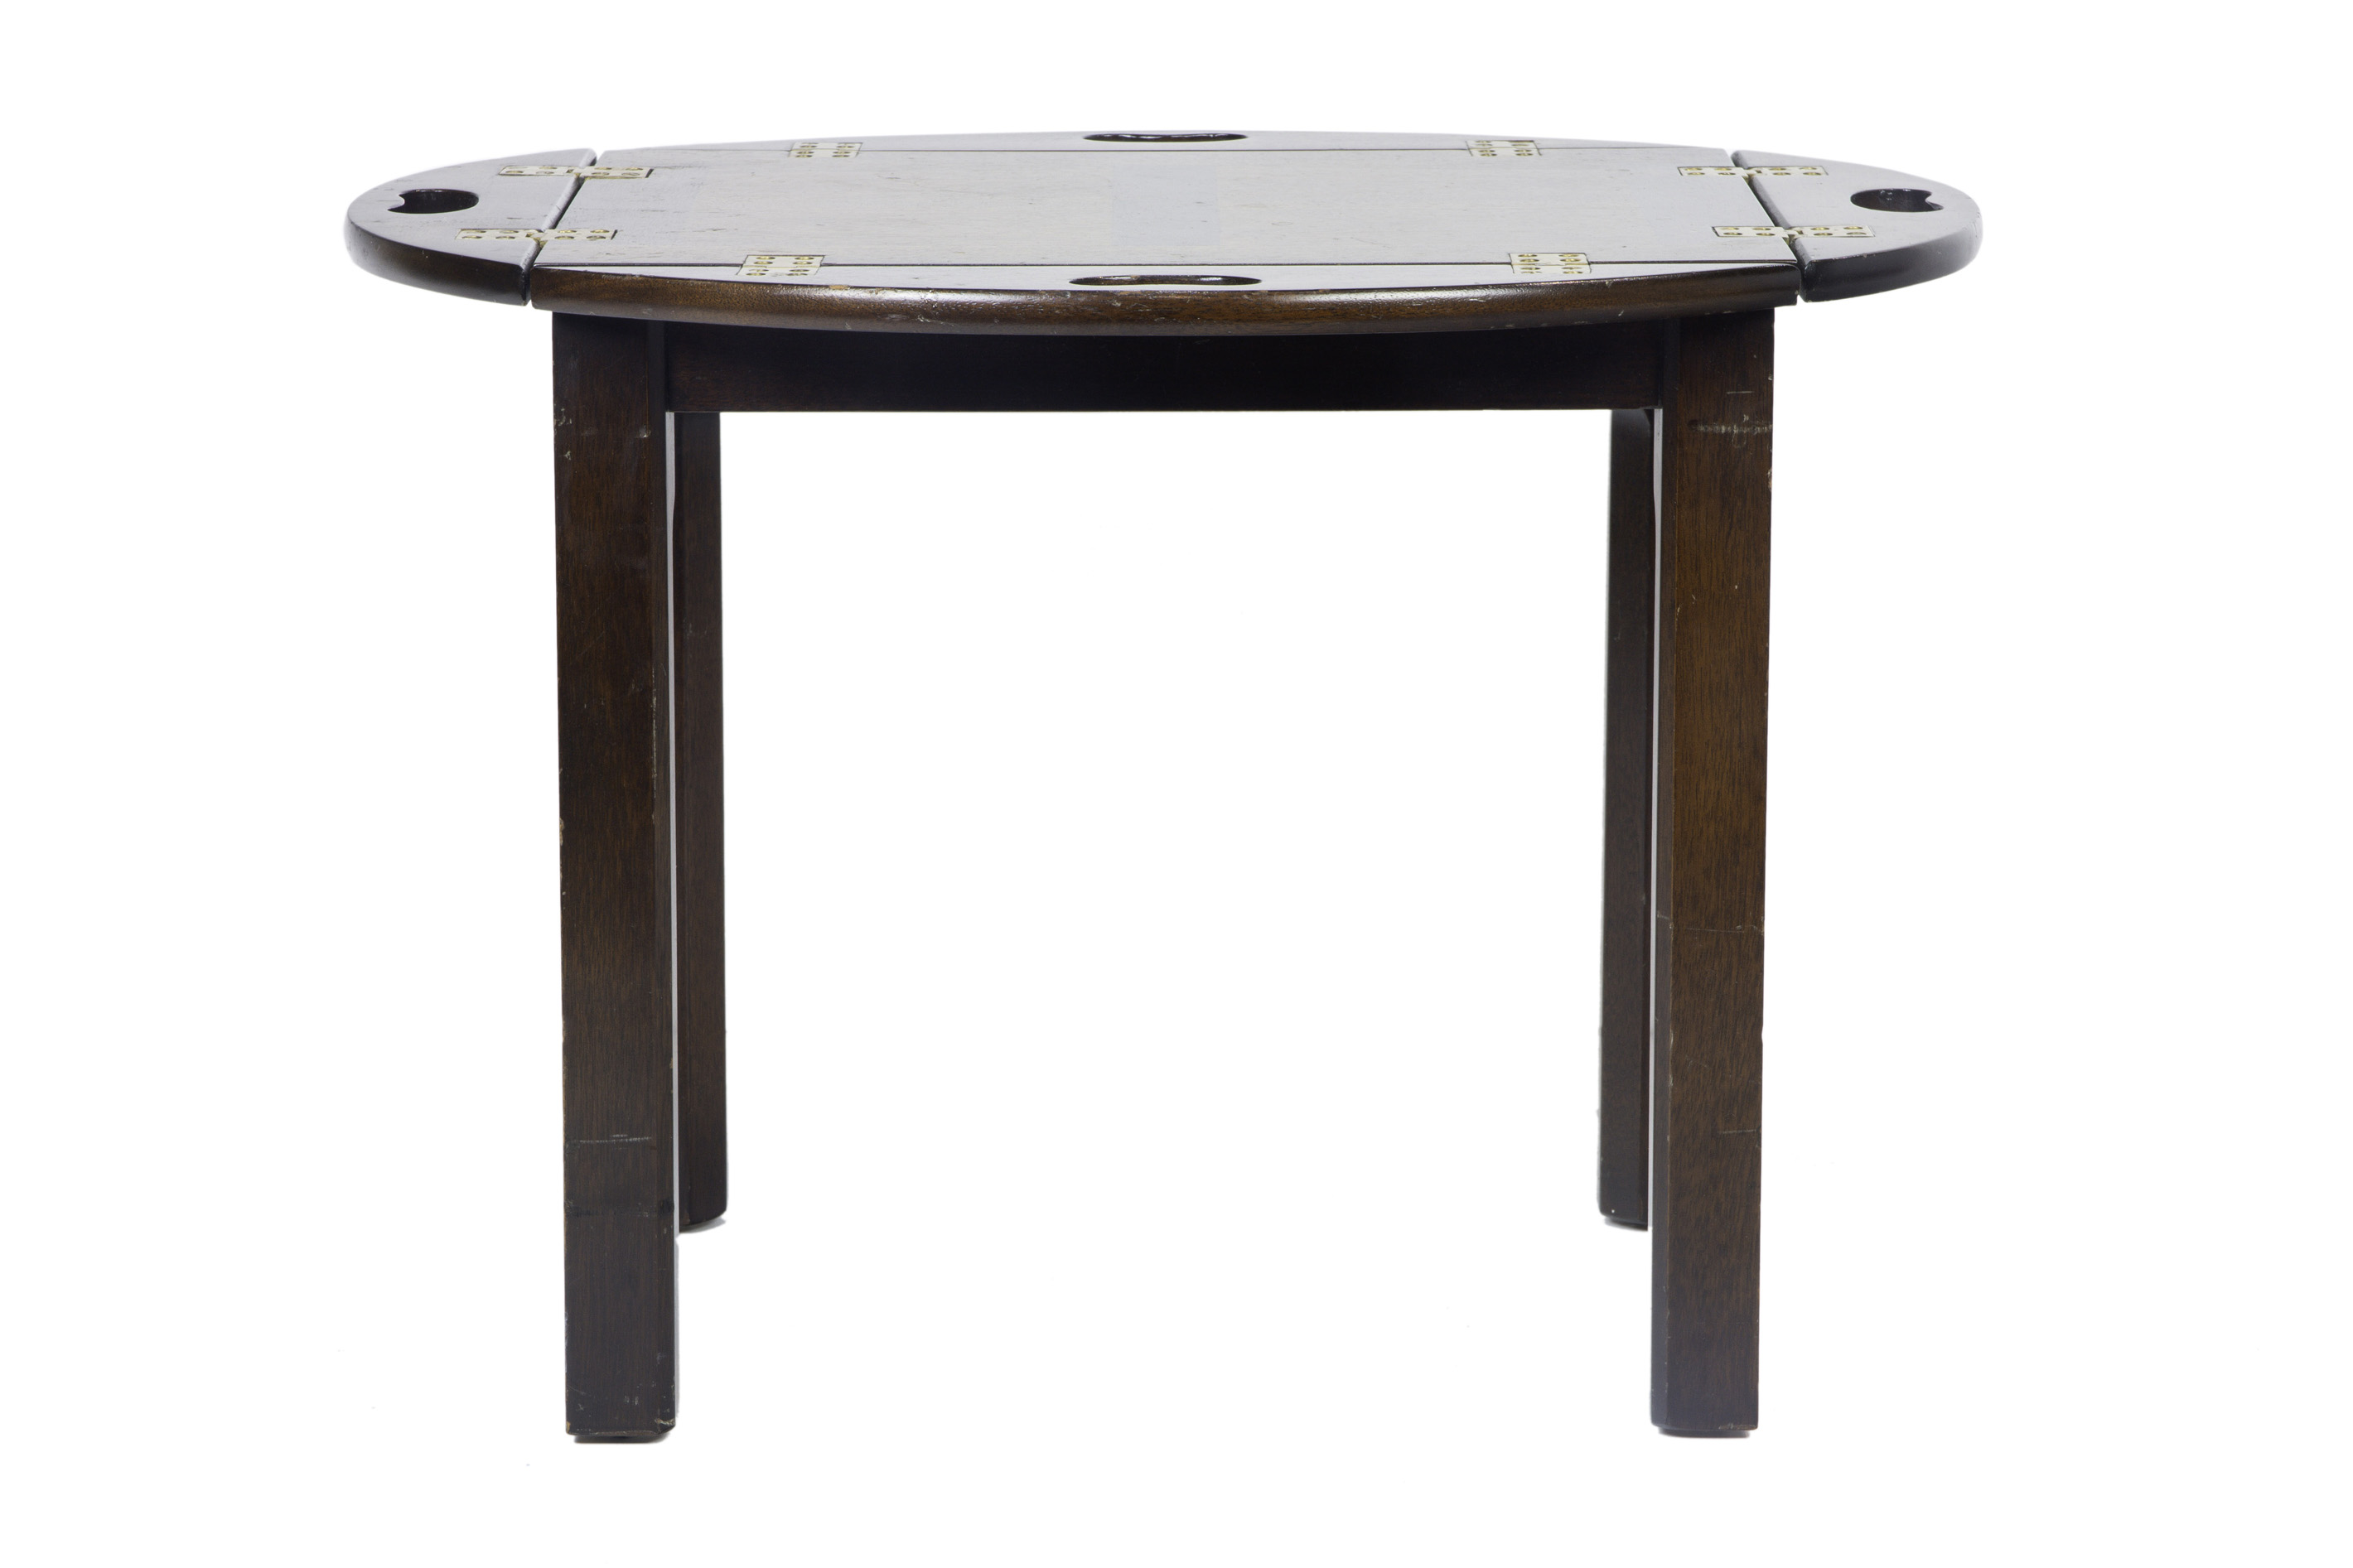 A GEORGIAN STYLE OCCASIONAL TABLE 3a428f